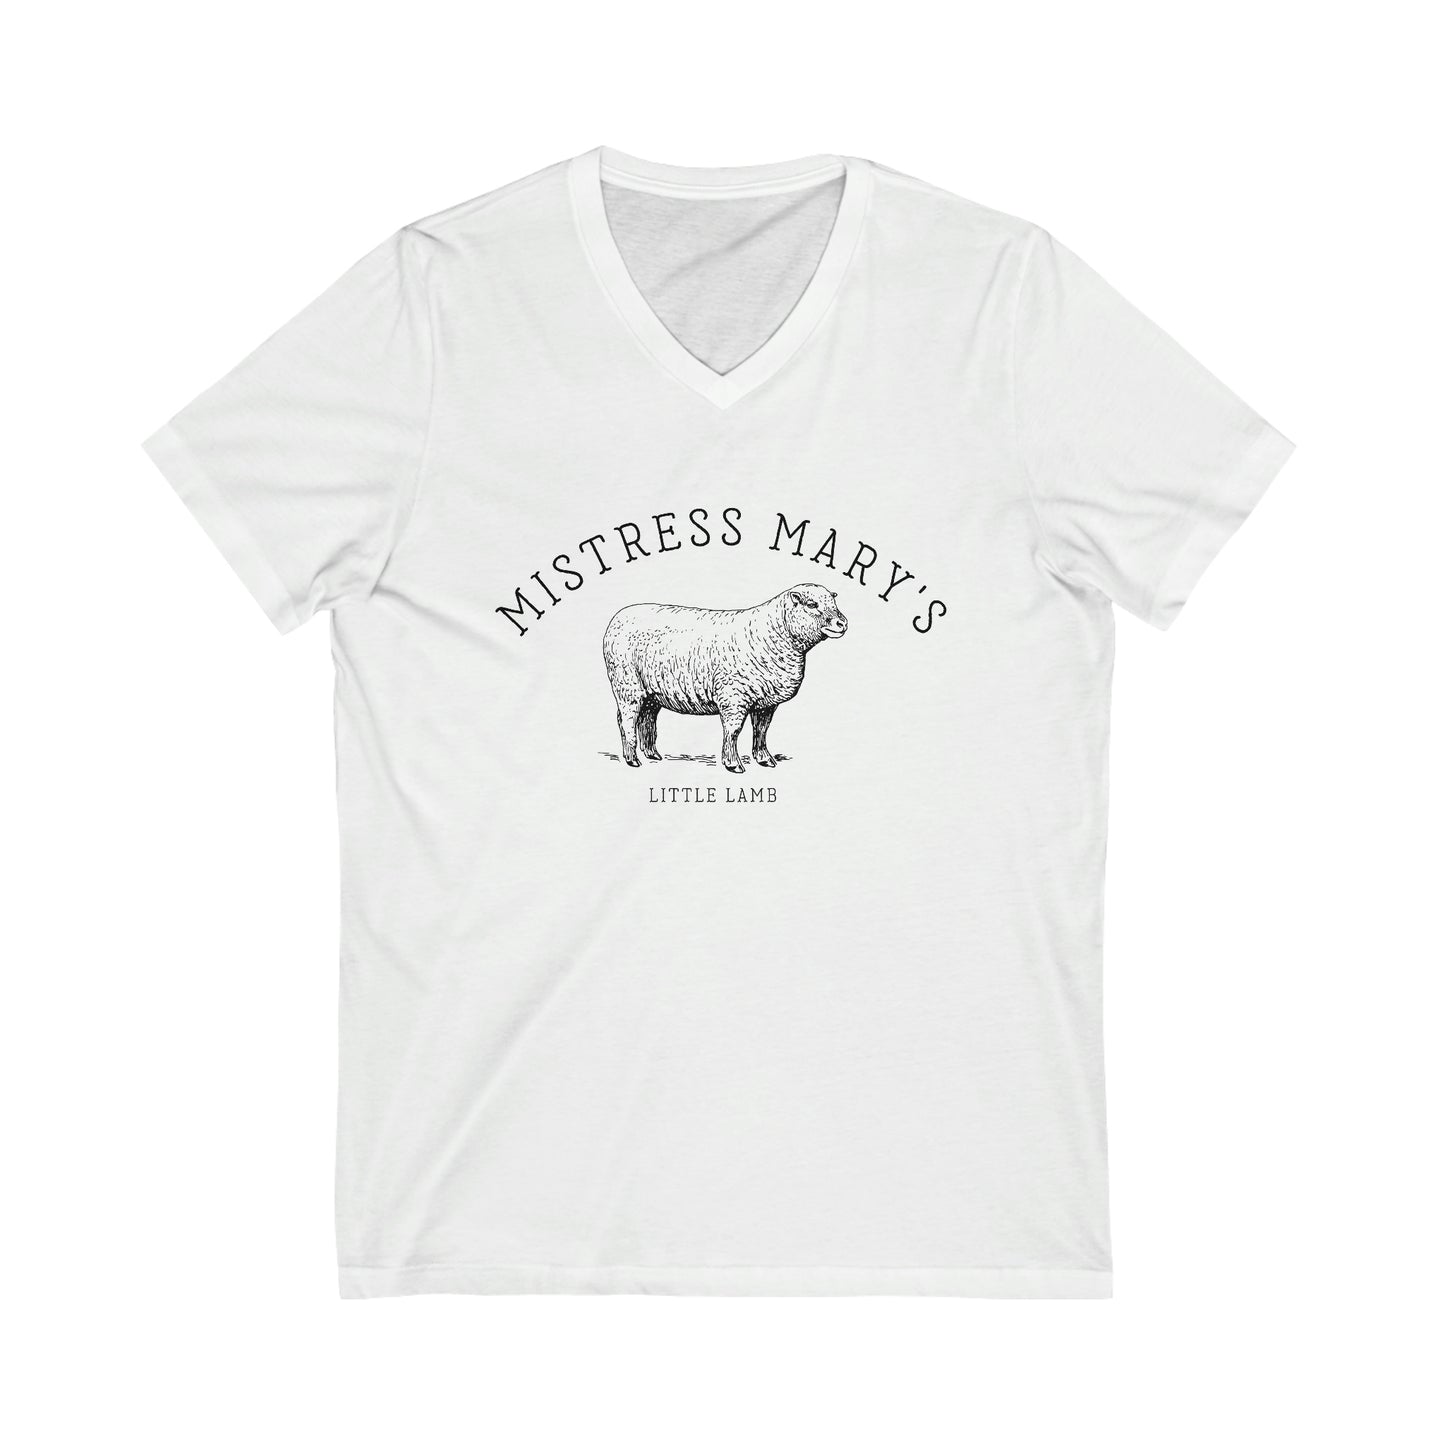 The little lamb | Relaxed Fit V-Neck Tee